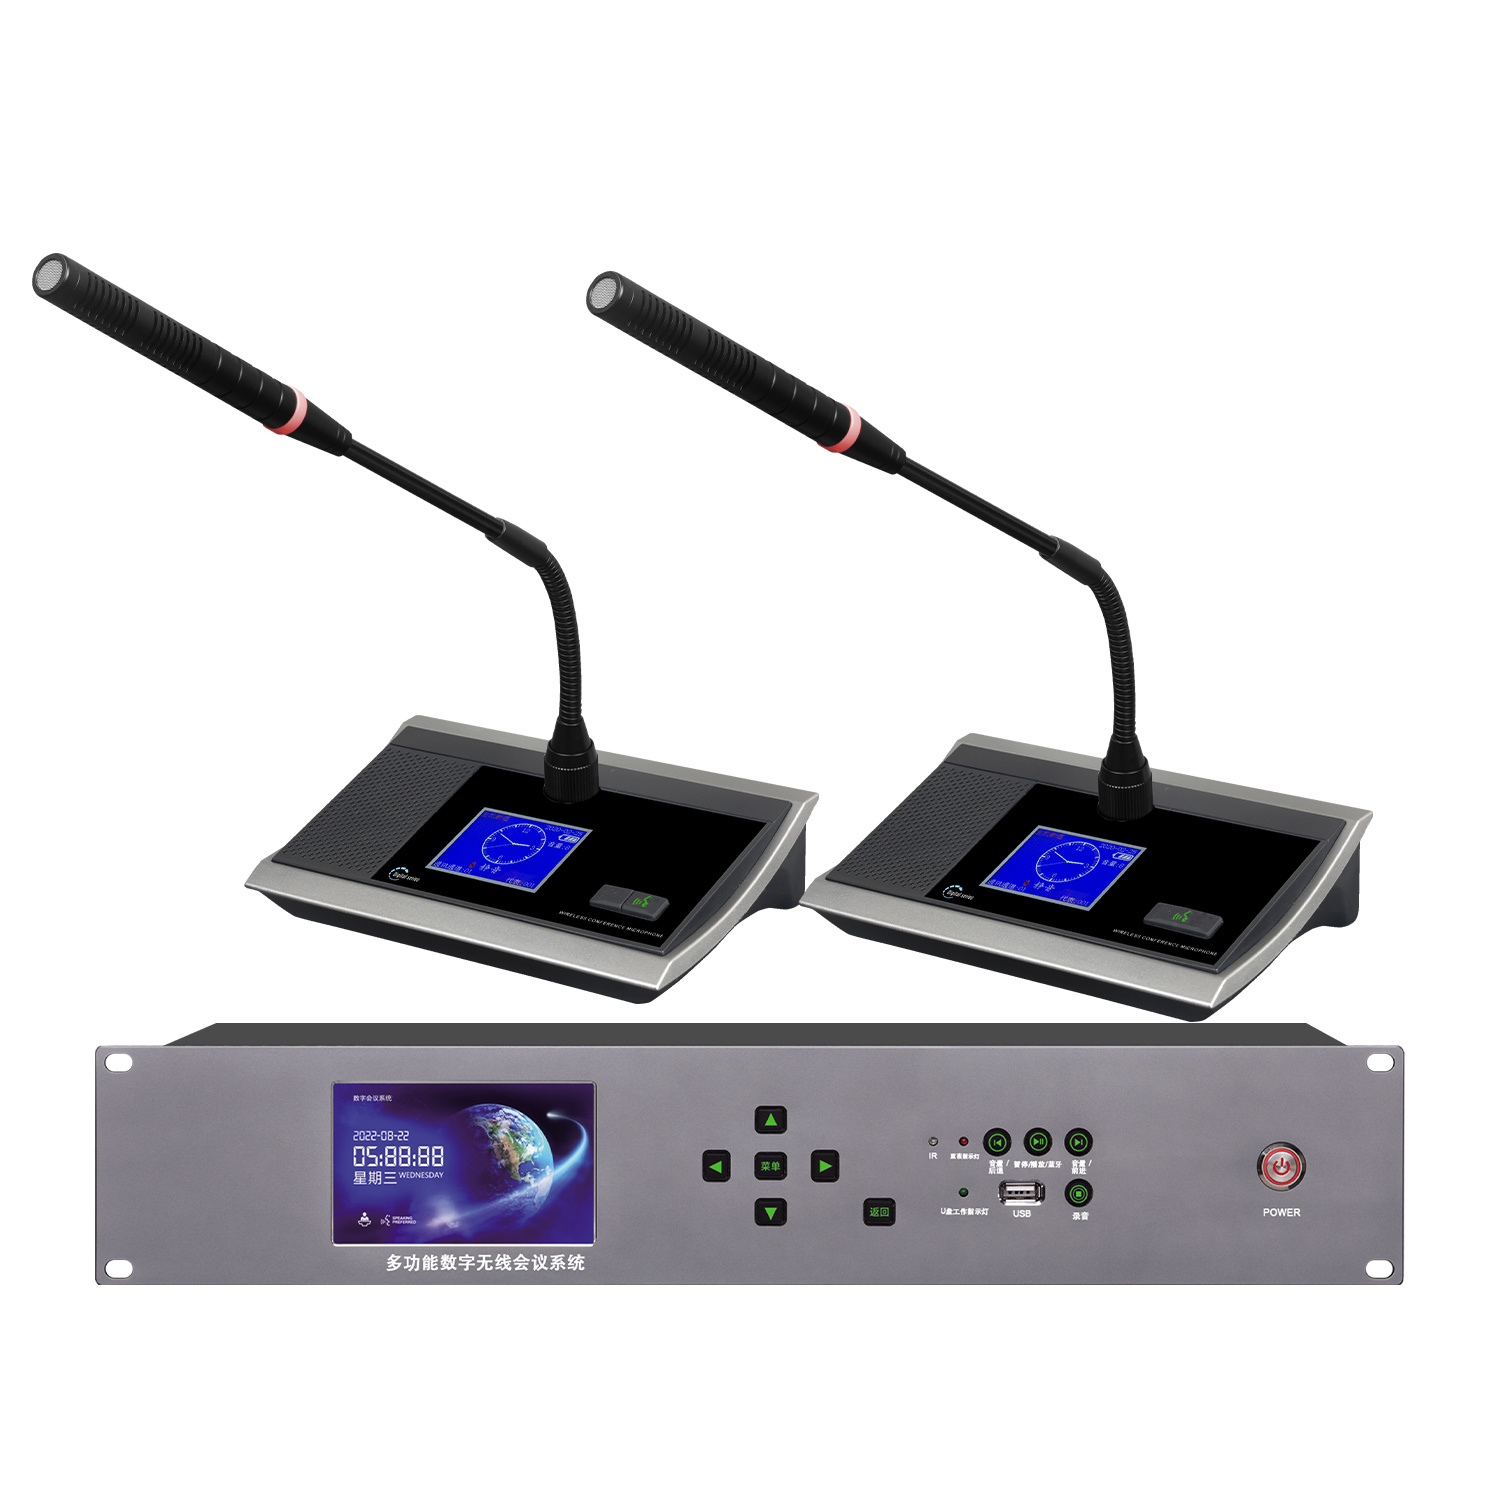 TRAIS TS-7000 Wireless Multi-function Digital Conference System with Camera Tracking Function, Easy speech clear pickup!